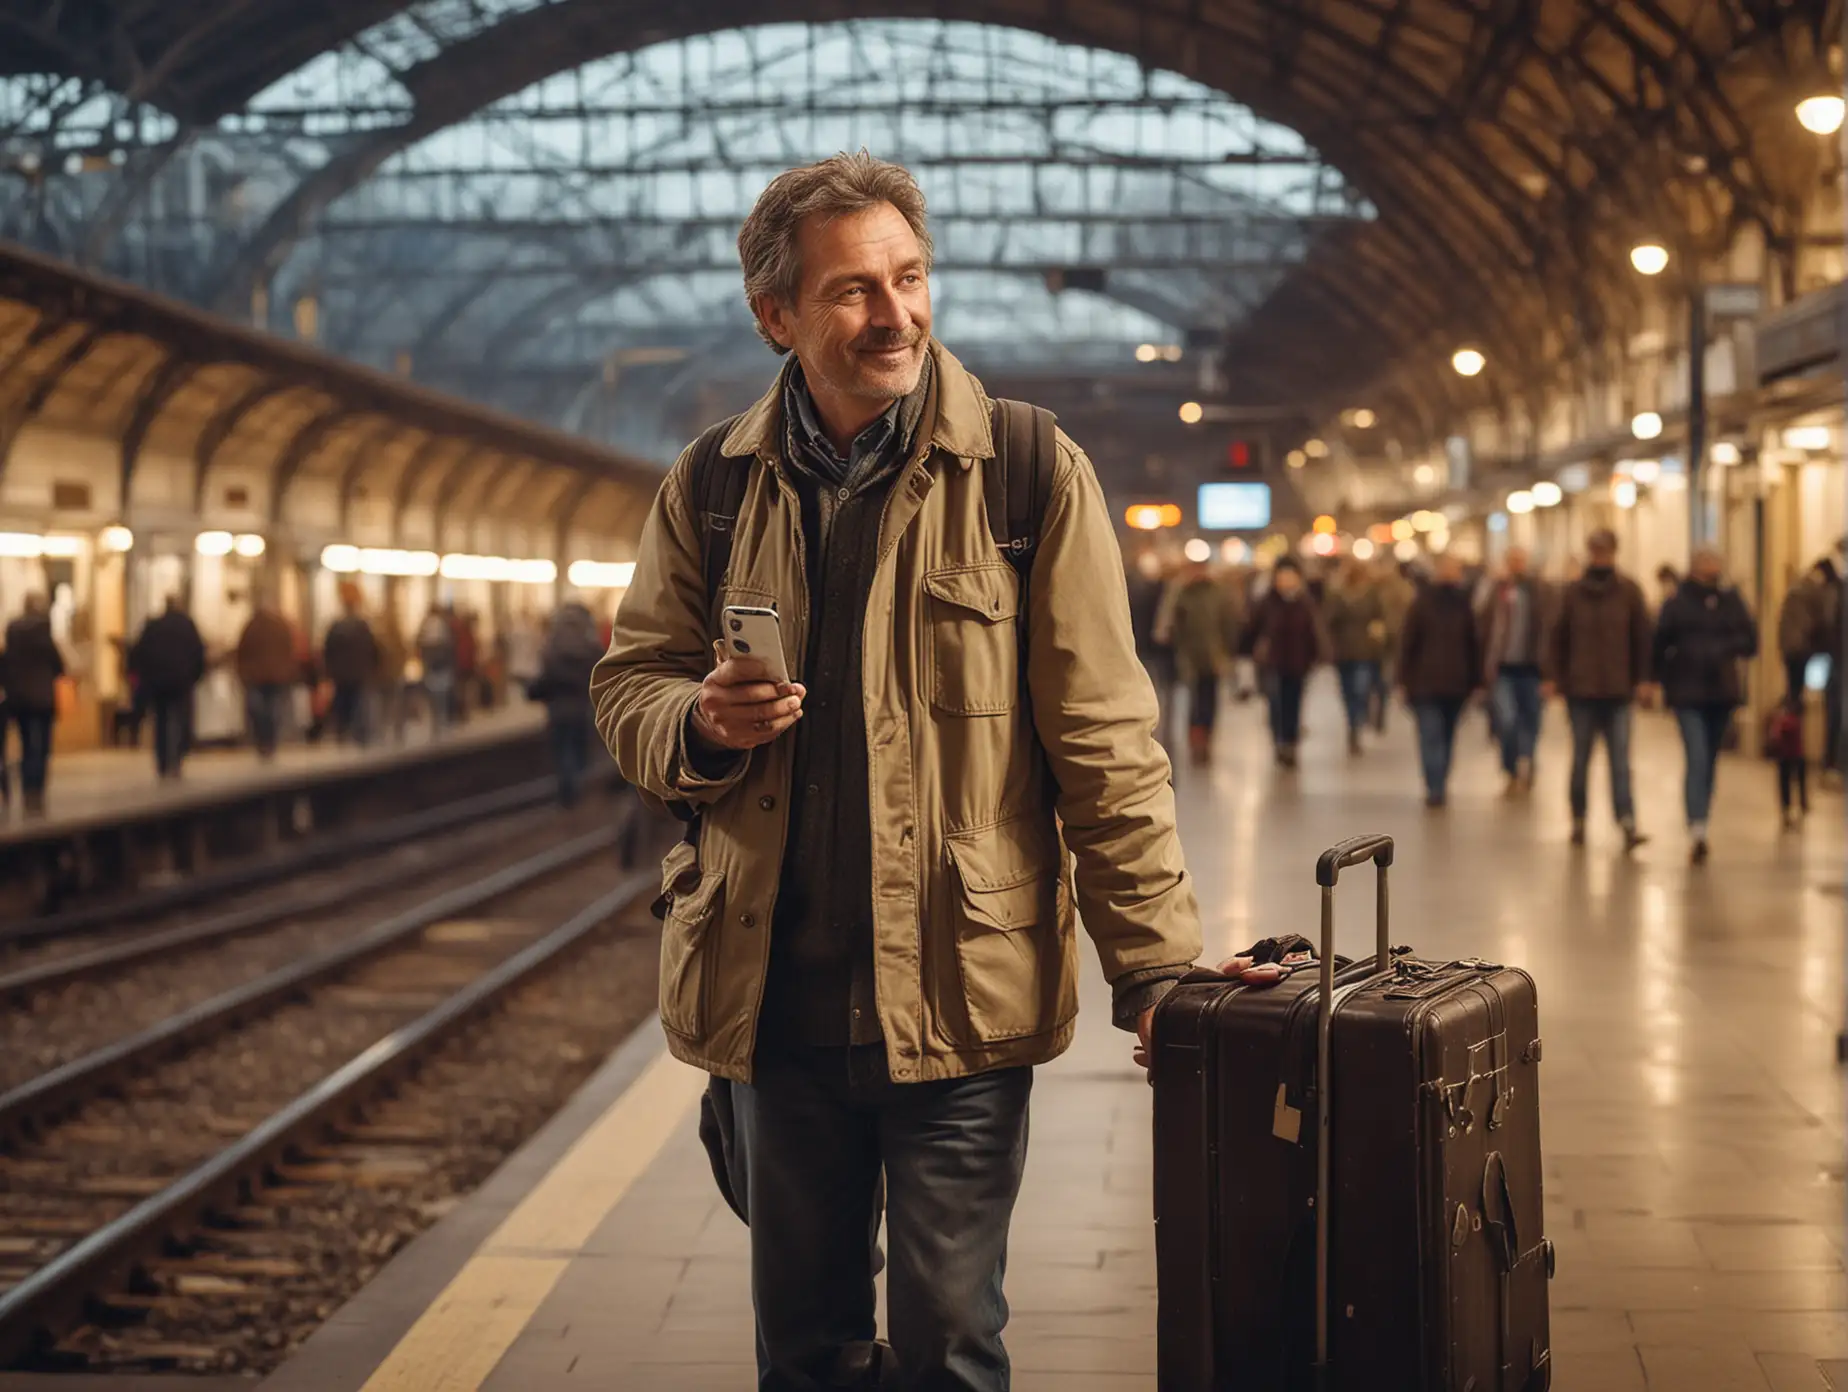 A man above 50 years old, dressed casualy. He has a suitcase by his side, a map in one hand, and a mobile phone in the other. He is looking at the map. He looks happy but a little lost. He is in a raillway station, full of people. The light is warm as an autumn evening,